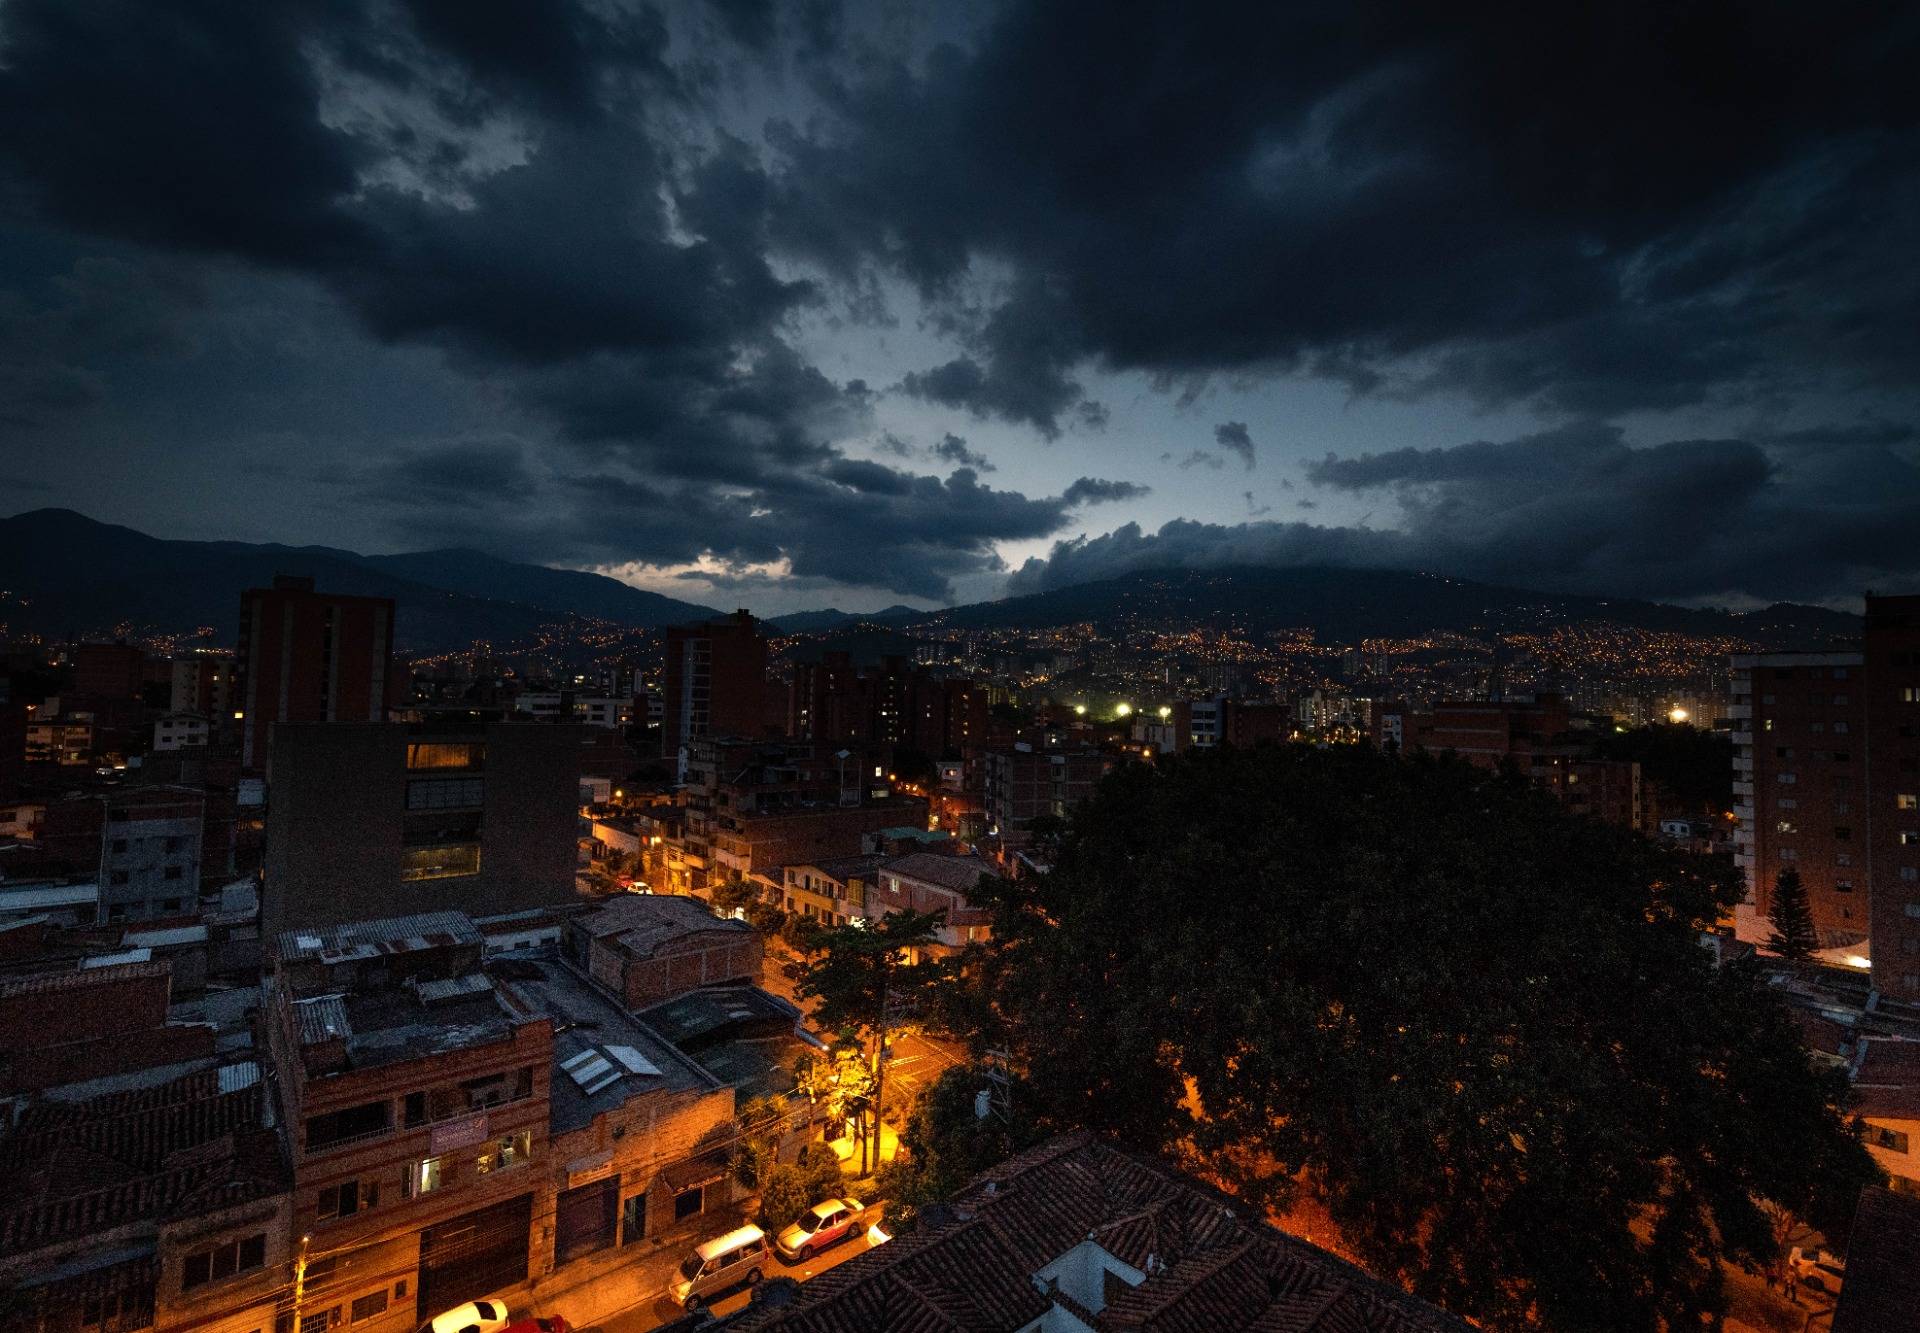 Nomad's first view of Medellín